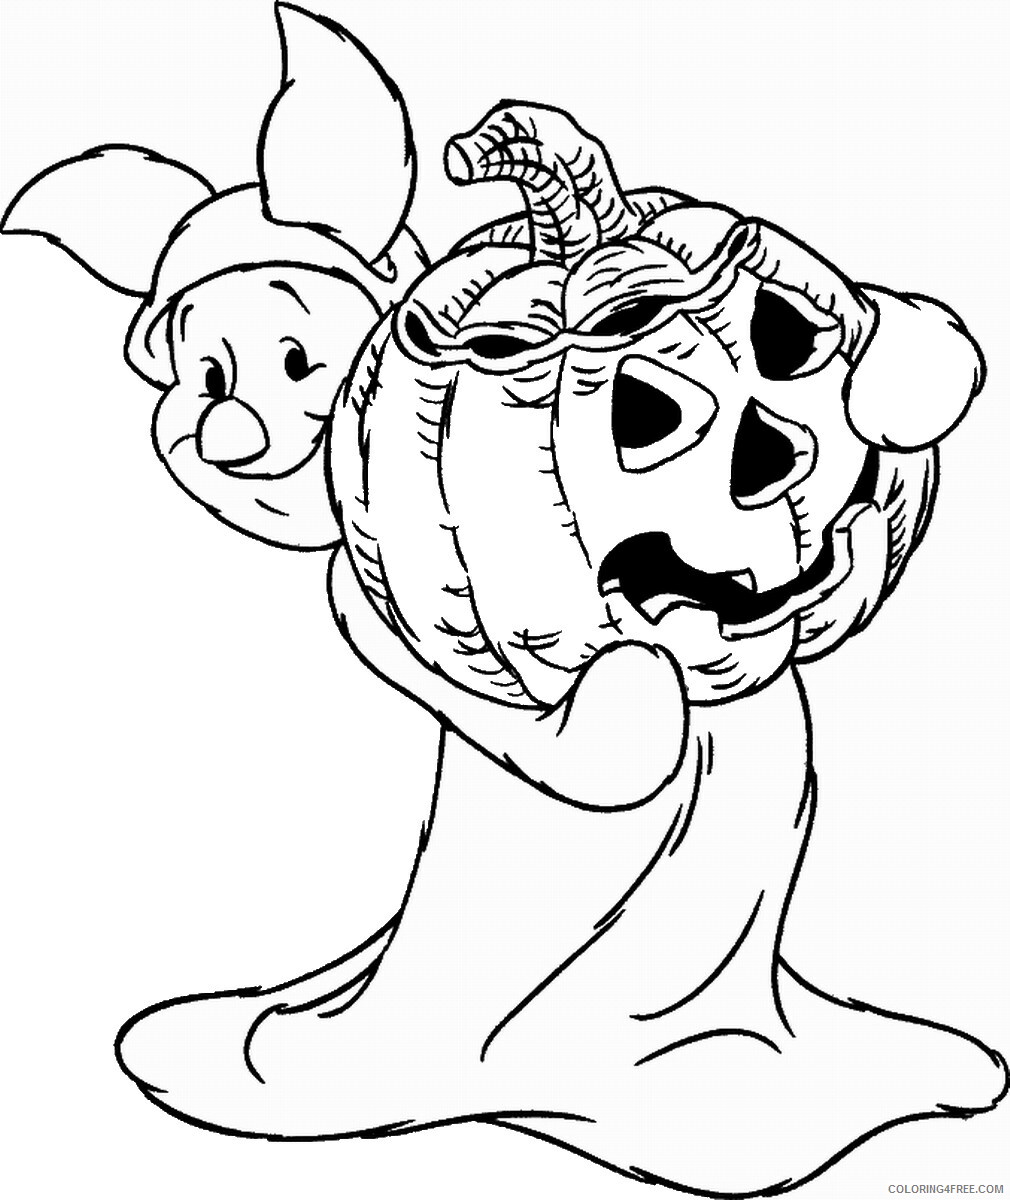 Halloween Coloring Pages Holiday halloween_coloring27 Printable 2021 0636 Coloring4free